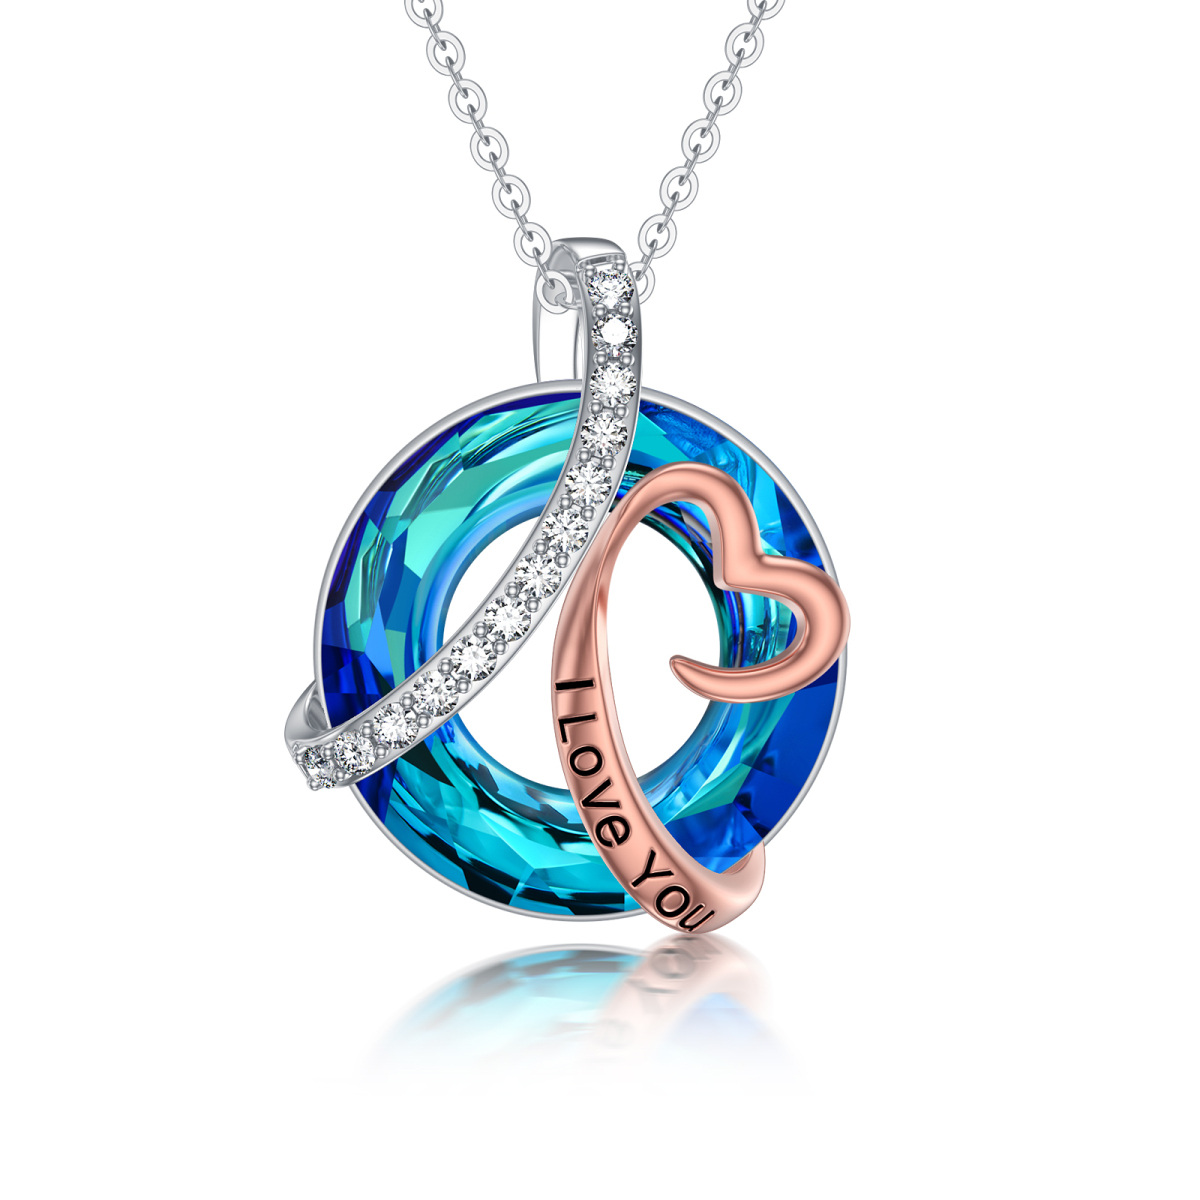 14K Silver & Rose Gold Circular Shaped Heart Crystal Pendant Necklace with Engraved Word-1